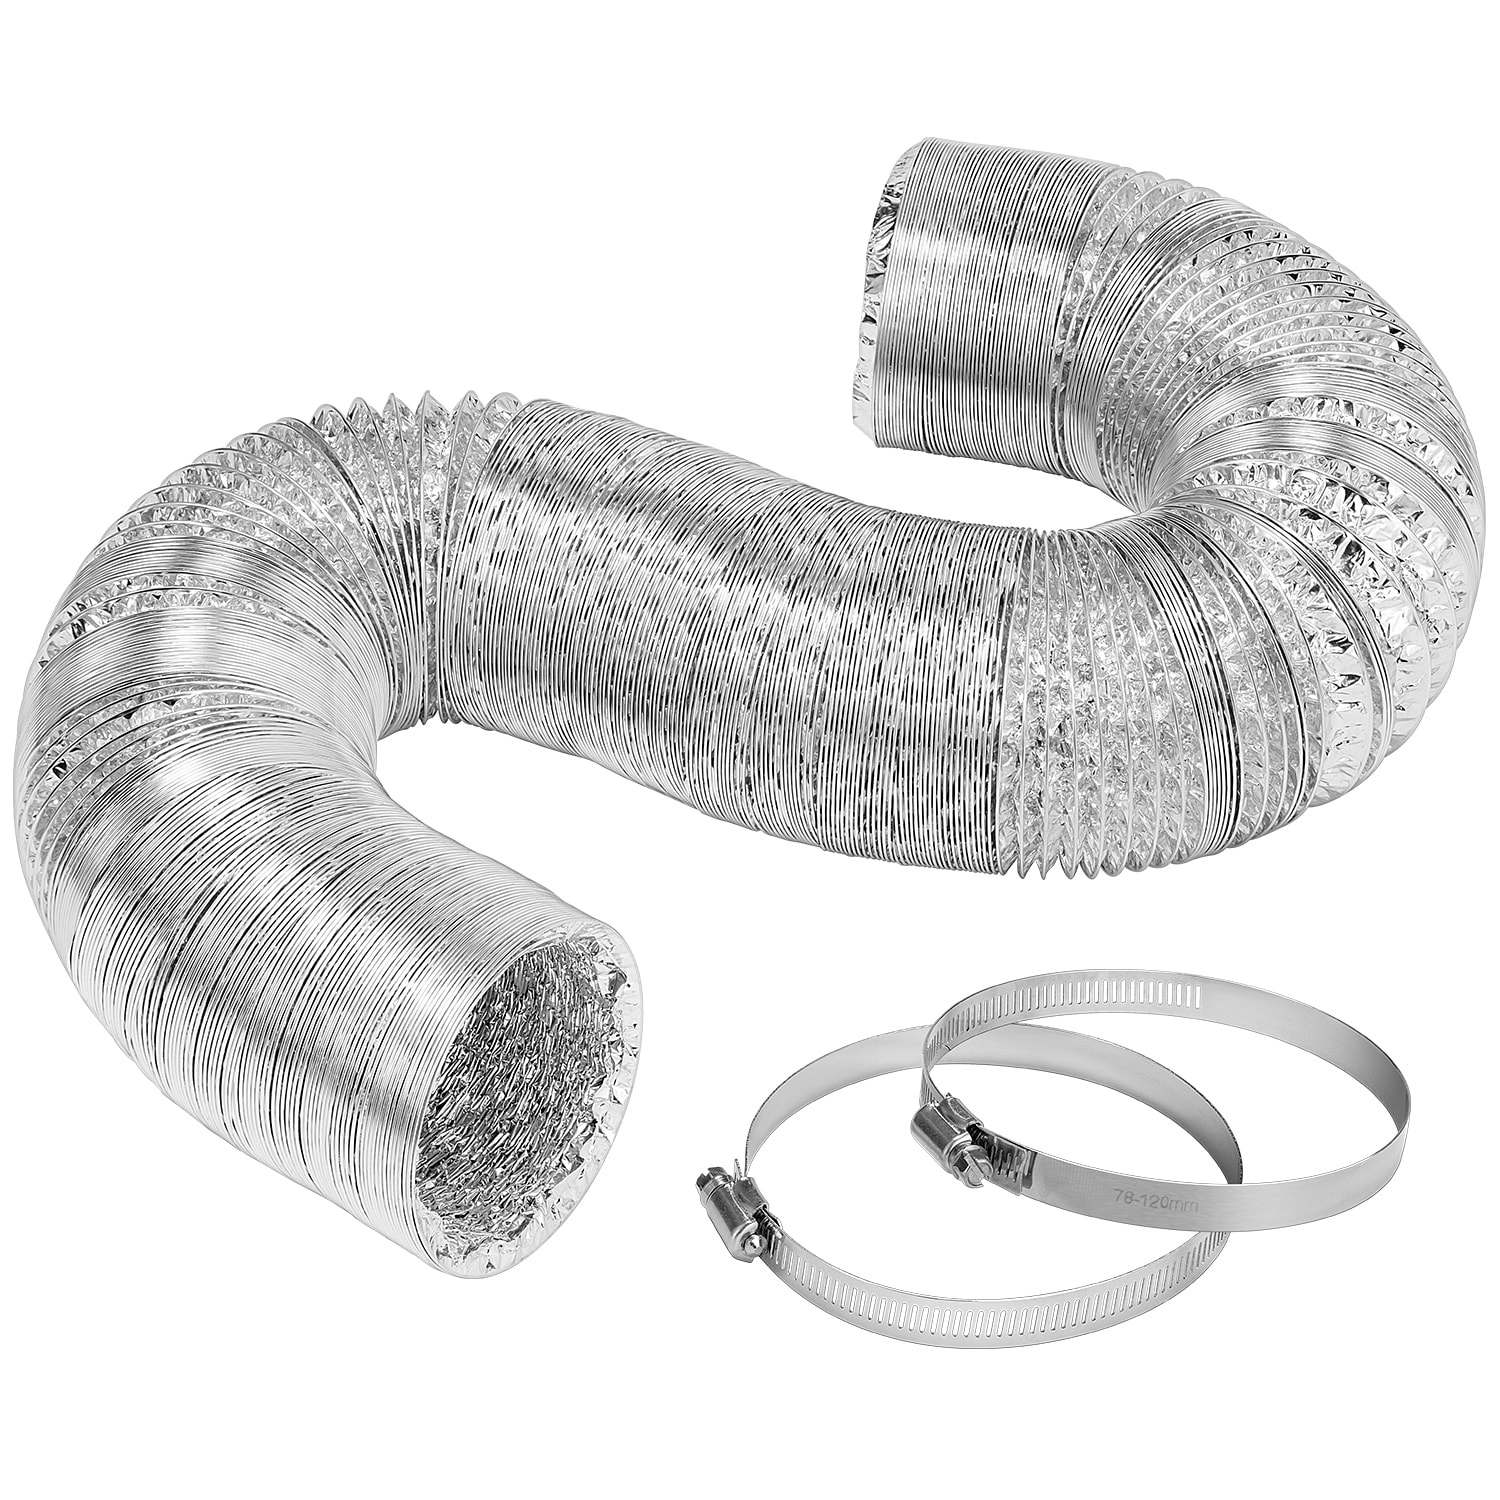 4.0 ID Flexible Ducting (39 Length) for Particle Separator – S&B